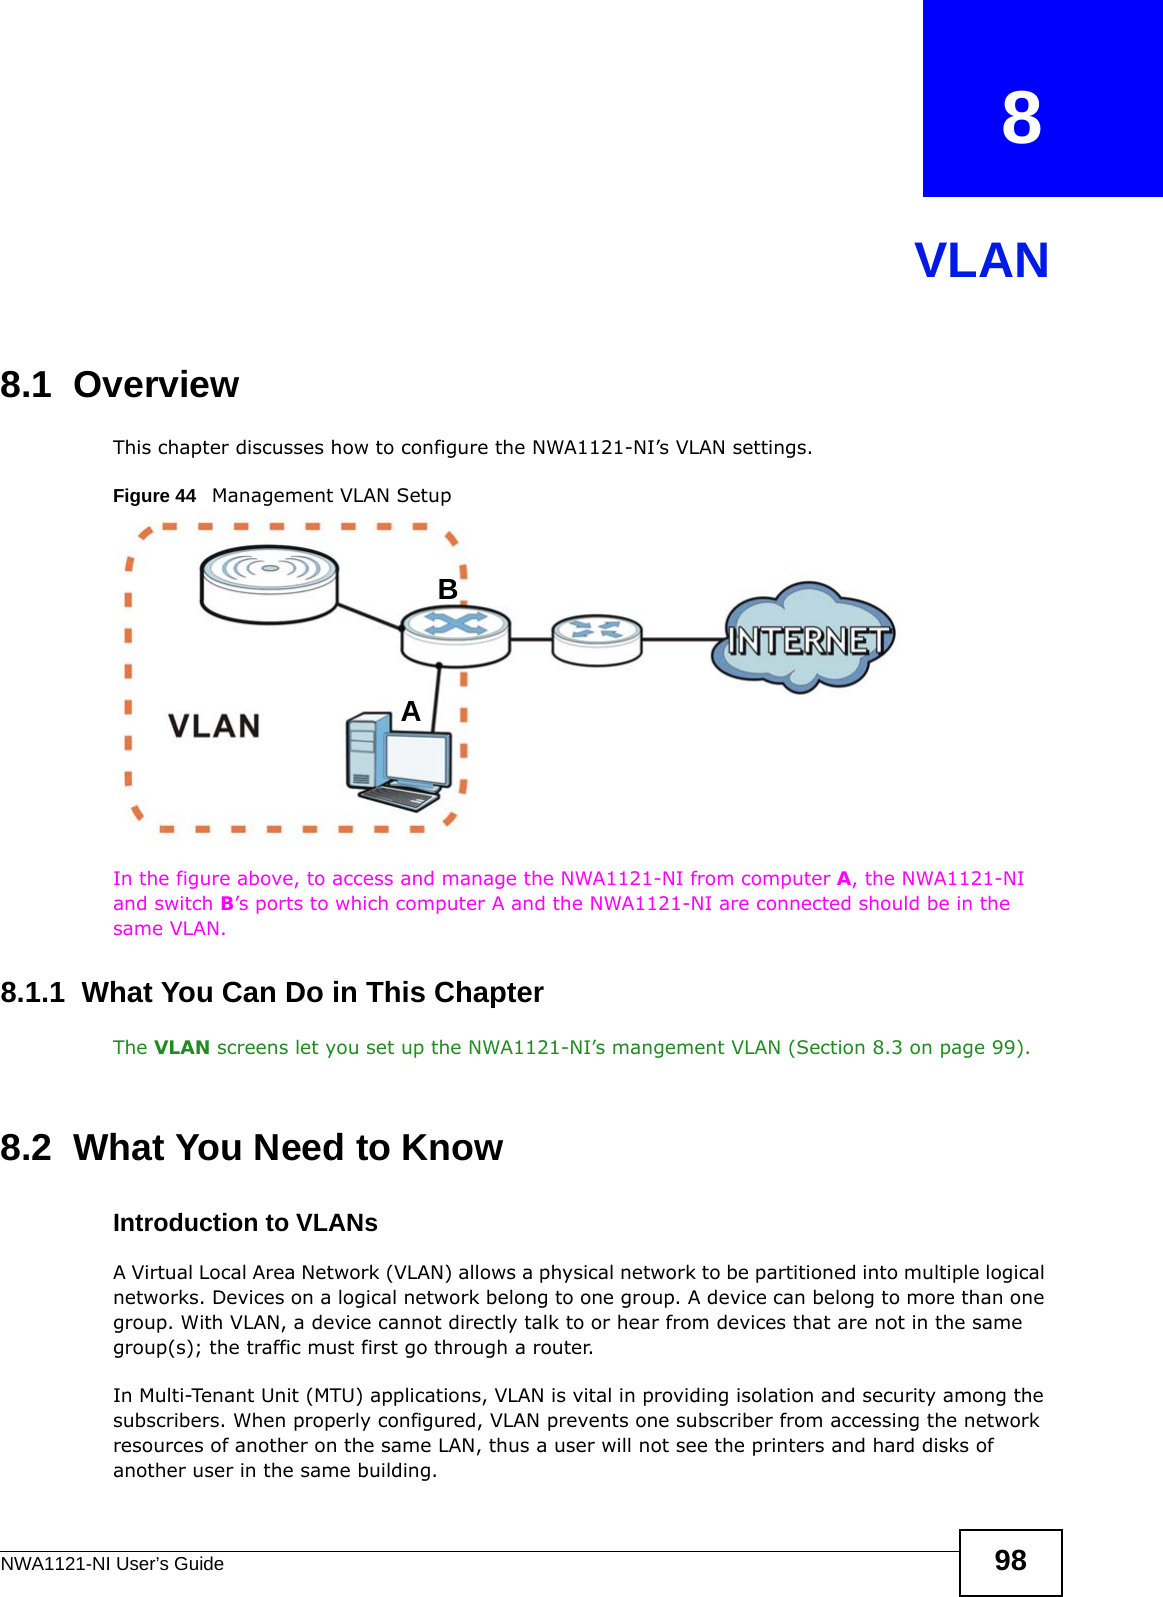 NWA1121-NI User’s Guide 98CHAPTER   8VLAN8.1  OverviewThis chapter discusses how to configure the NWA1121-NI’s VLAN settings.Figure 44   Management VLAN SetupIn the figure above, to access and manage the NWA1121-NI from computer A, the NWA1121-NI and switch B’s ports to which computer A and the NWA1121-NI are connected should be in the same VLAN.8.1.1  What You Can Do in This ChapterThe VLAN screens let you set up the NWA1121-NI’s mangement VLAN (Section 8.3 on page 99).8.2  What You Need to KnowIntroduction to VLANs A Virtual Local Area Network (VLAN) allows a physical network to be partitioned into multiple logical networks. Devices on a logical network belong to one group. A device can belong to more than one group. With VLAN, a device cannot directly talk to or hear from devices that are not in the same group(s); the traffic must first go through a router.In Multi-Tenant Unit (MTU) applications, VLAN is vital in providing isolation and security among the subscribers. When properly configured, VLAN prevents one subscriber from accessing the network resources of another on the same LAN, thus a user will not see the printers and hard disks of another user in the same building. AB